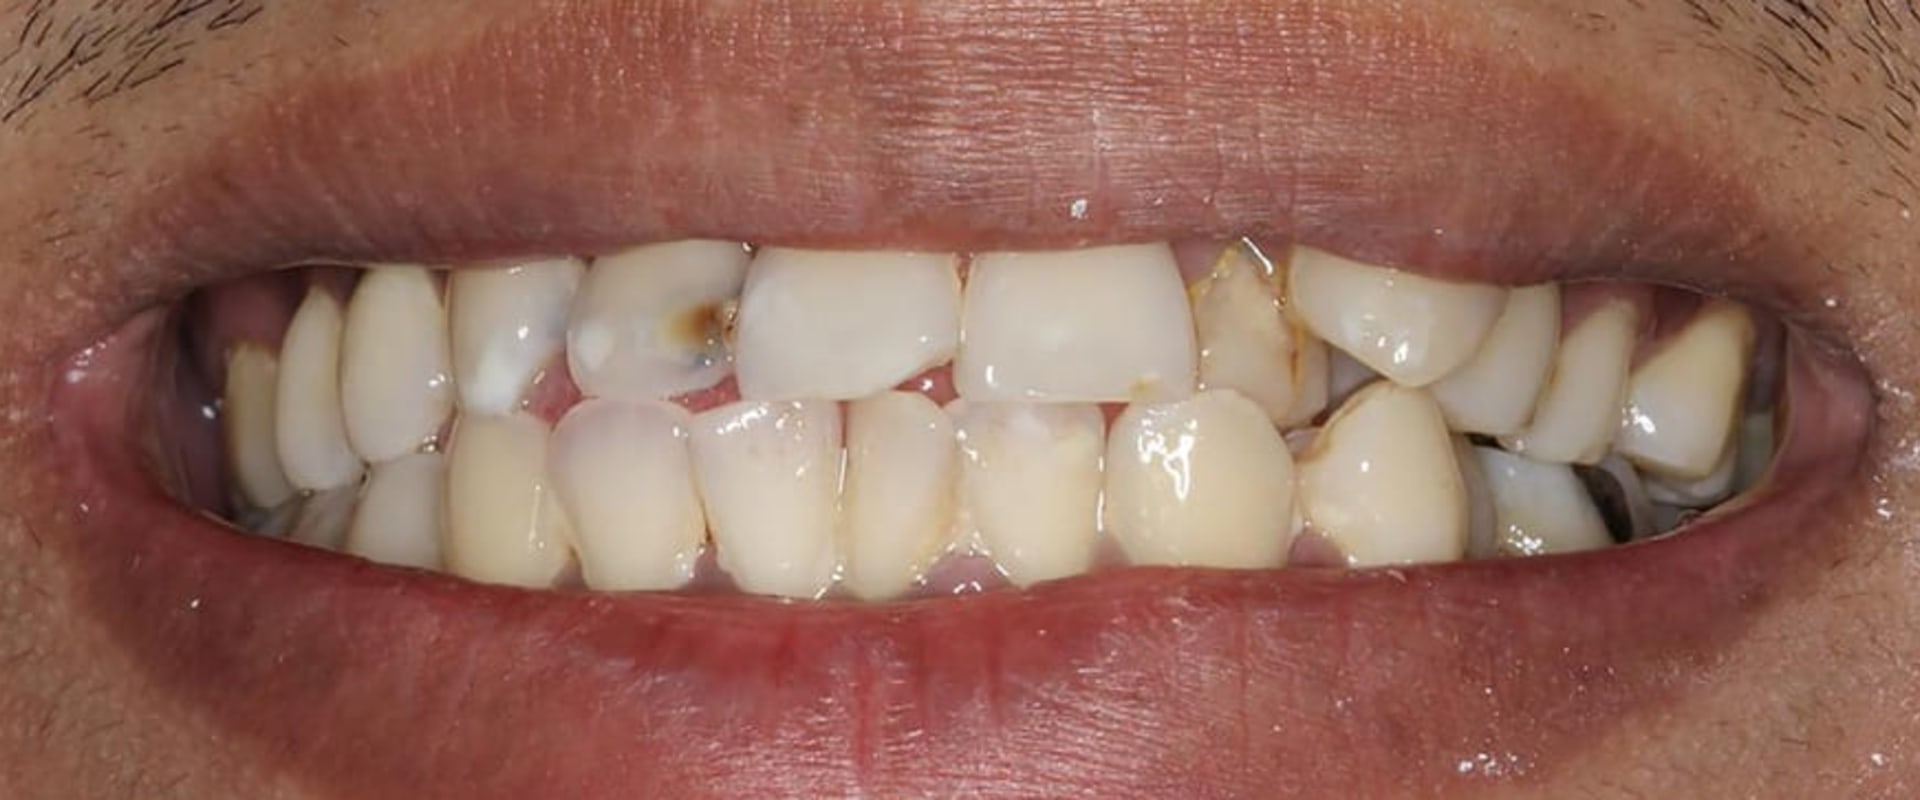 A Comprehensive Look at the Different Types of Dental Veneers